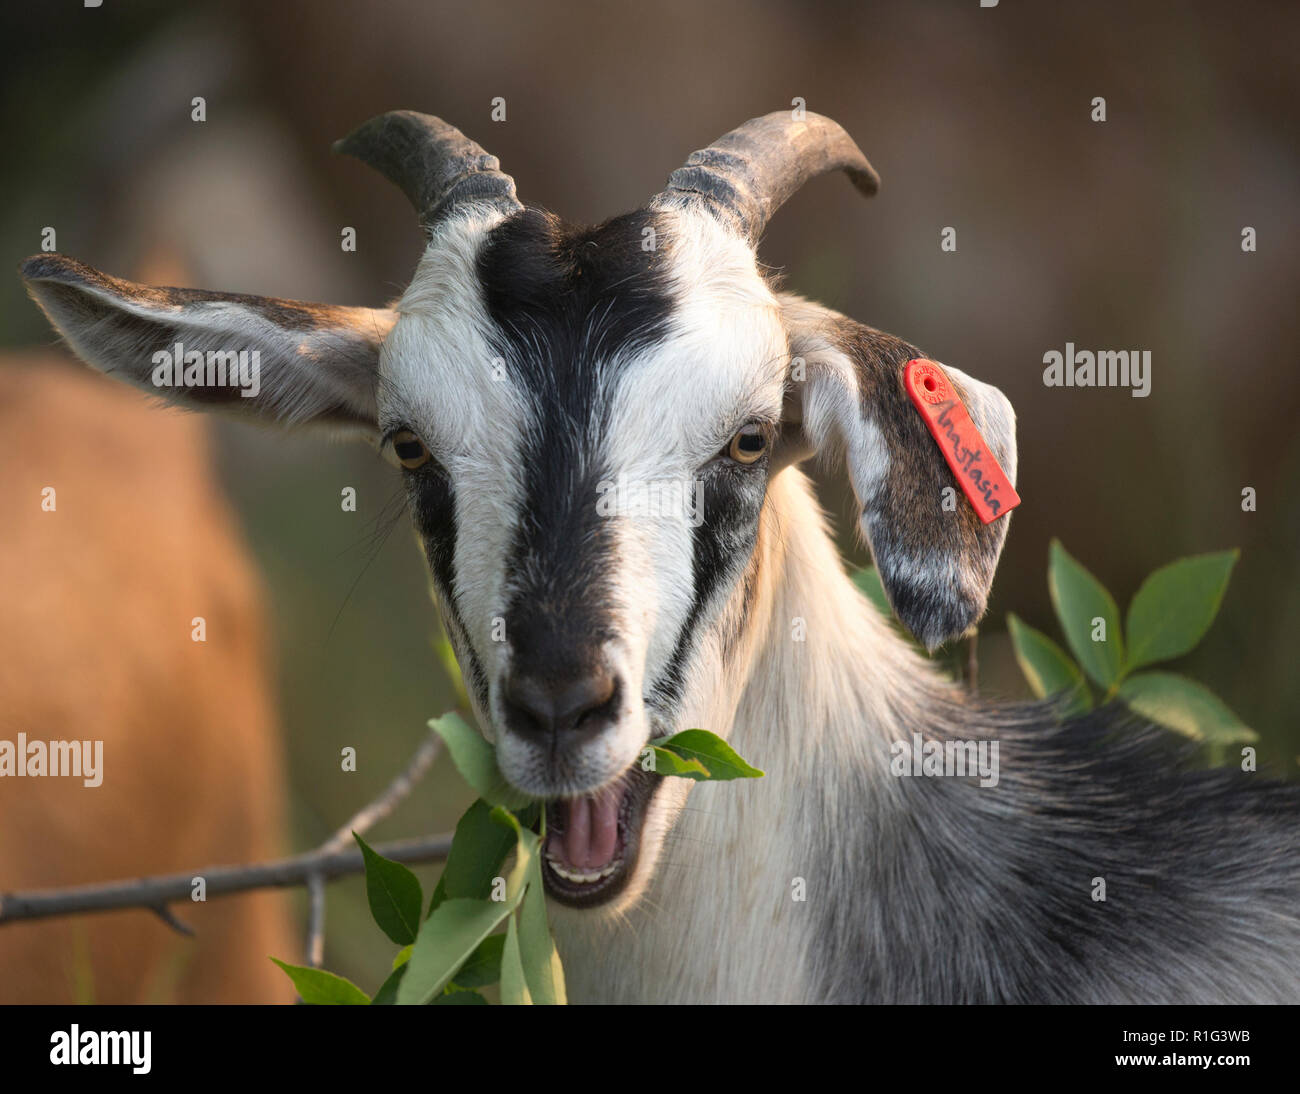 Targeted grazing by goat feeding on shrub for natural weed control in the city of Calgary. Ear tag with goat's name Anastasia. Capra hircus Stock Photo